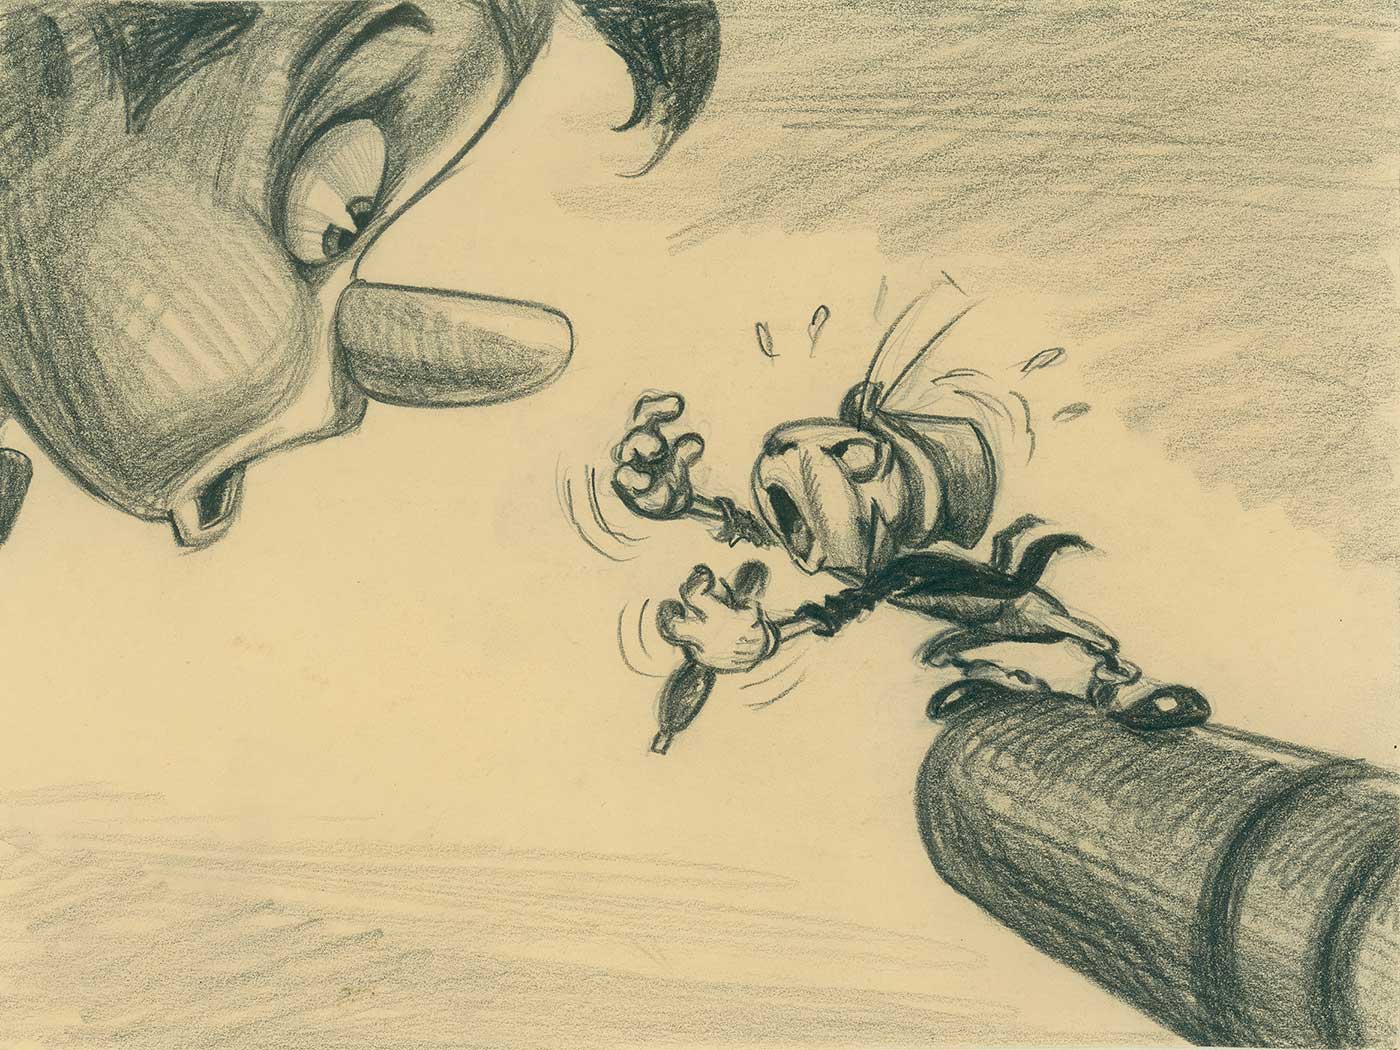 Disney Studio Artist, Pinocchio visual development, pencil on paper; collection of The Walt Disney Family Foundation, gift of Ron and Diane Miller, © Disney